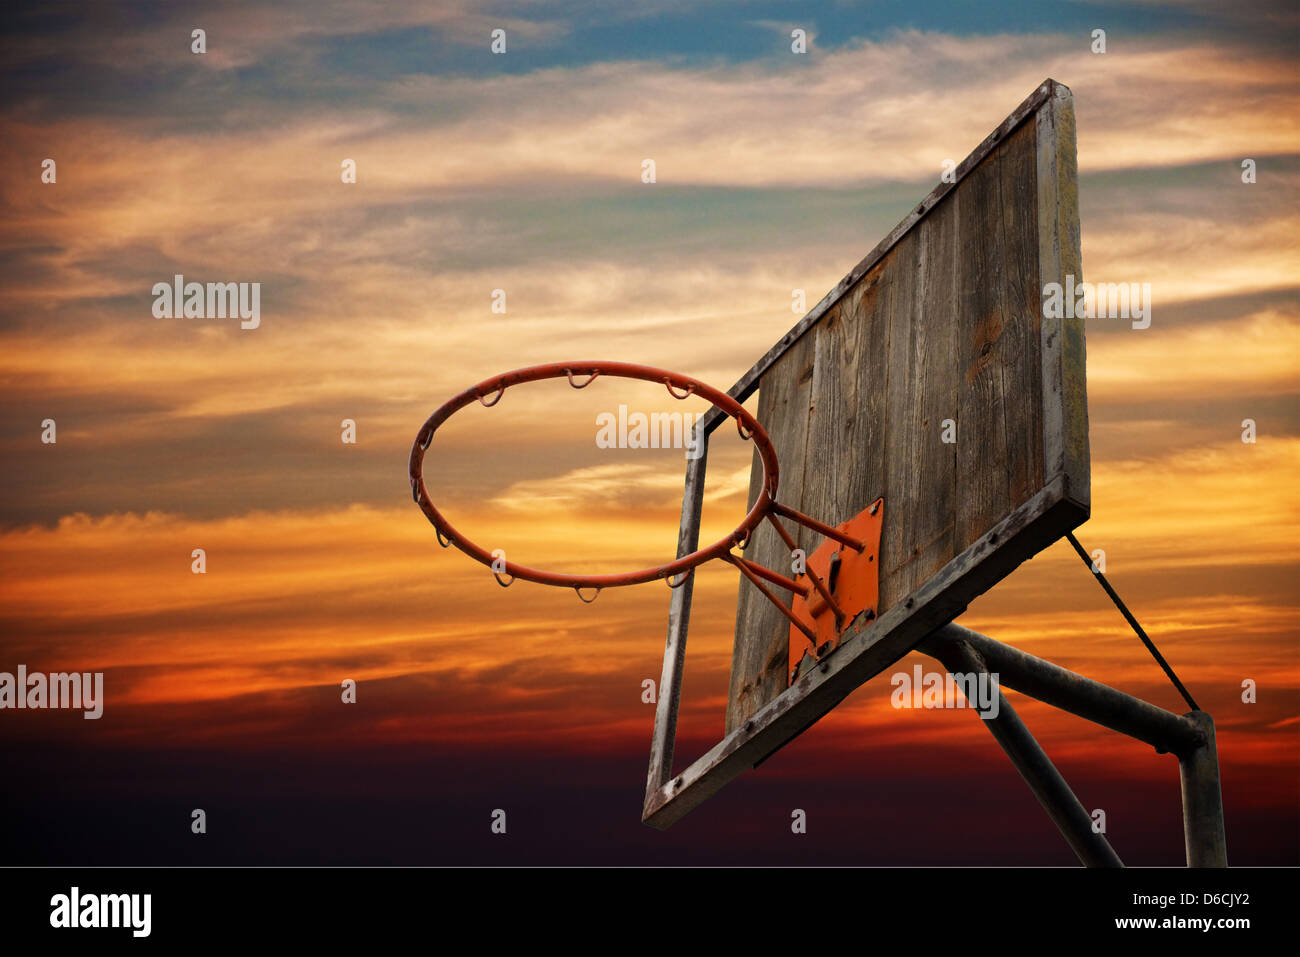 Street basketball. Old basketball hoop and a back board in sunset against the dark orange sky. Stock Photo